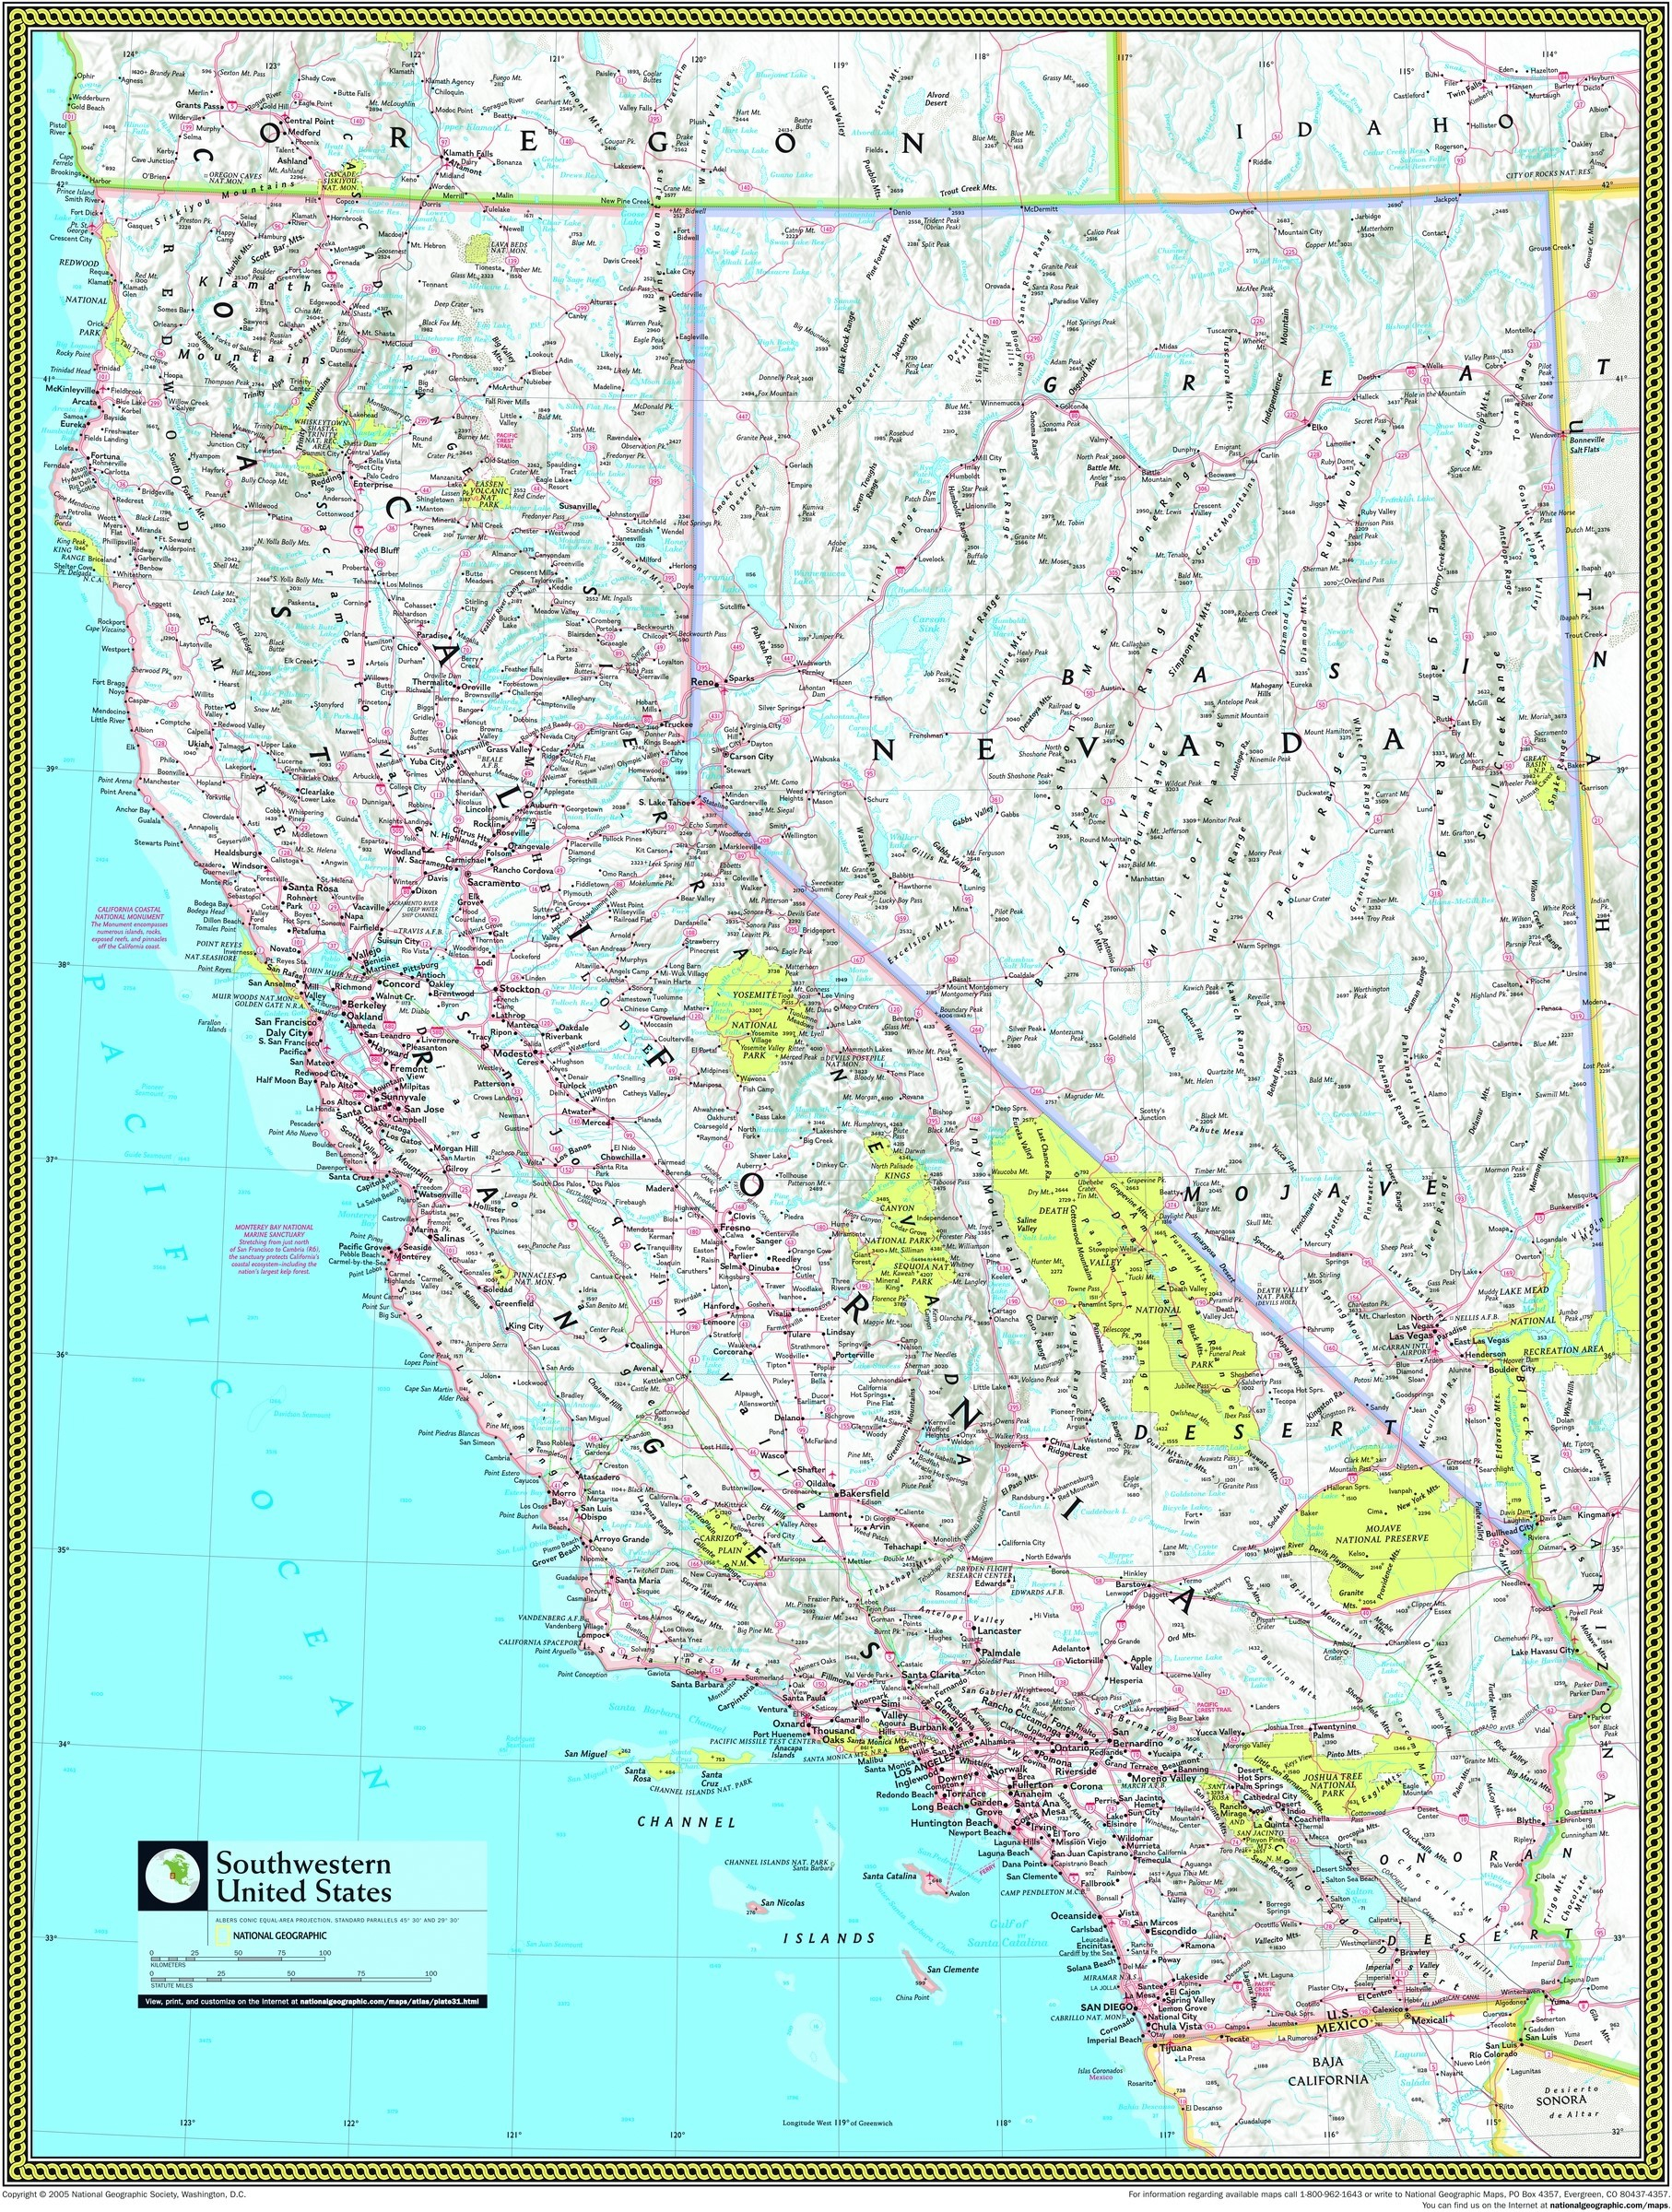 Southwestern United States Atlas Wall Map - Maps - National Geographic Maps California